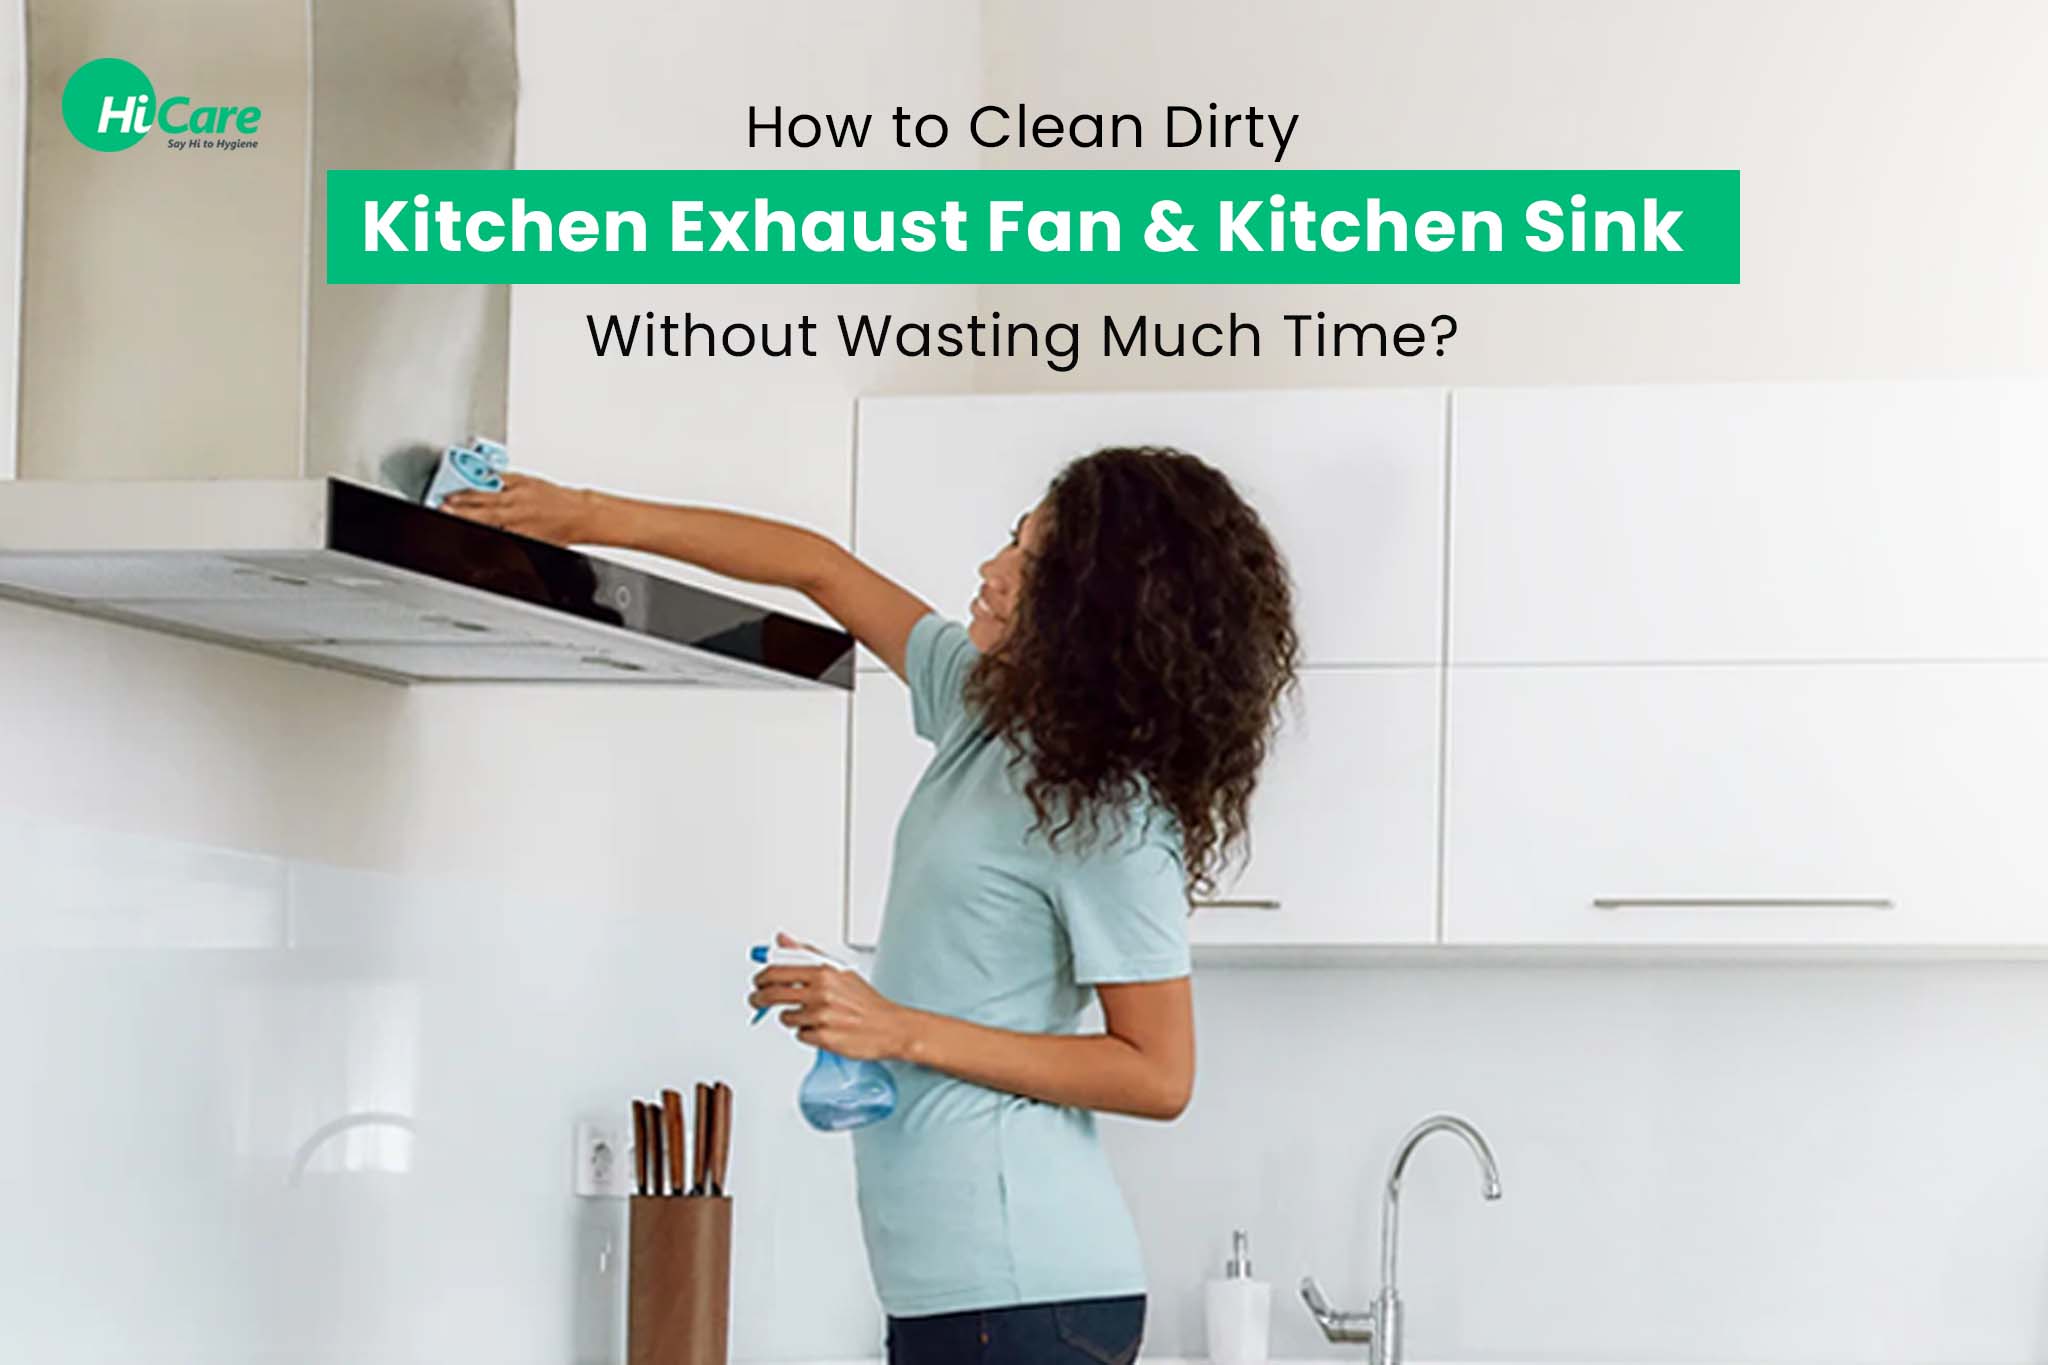 How to clean a kitchen extractor fan